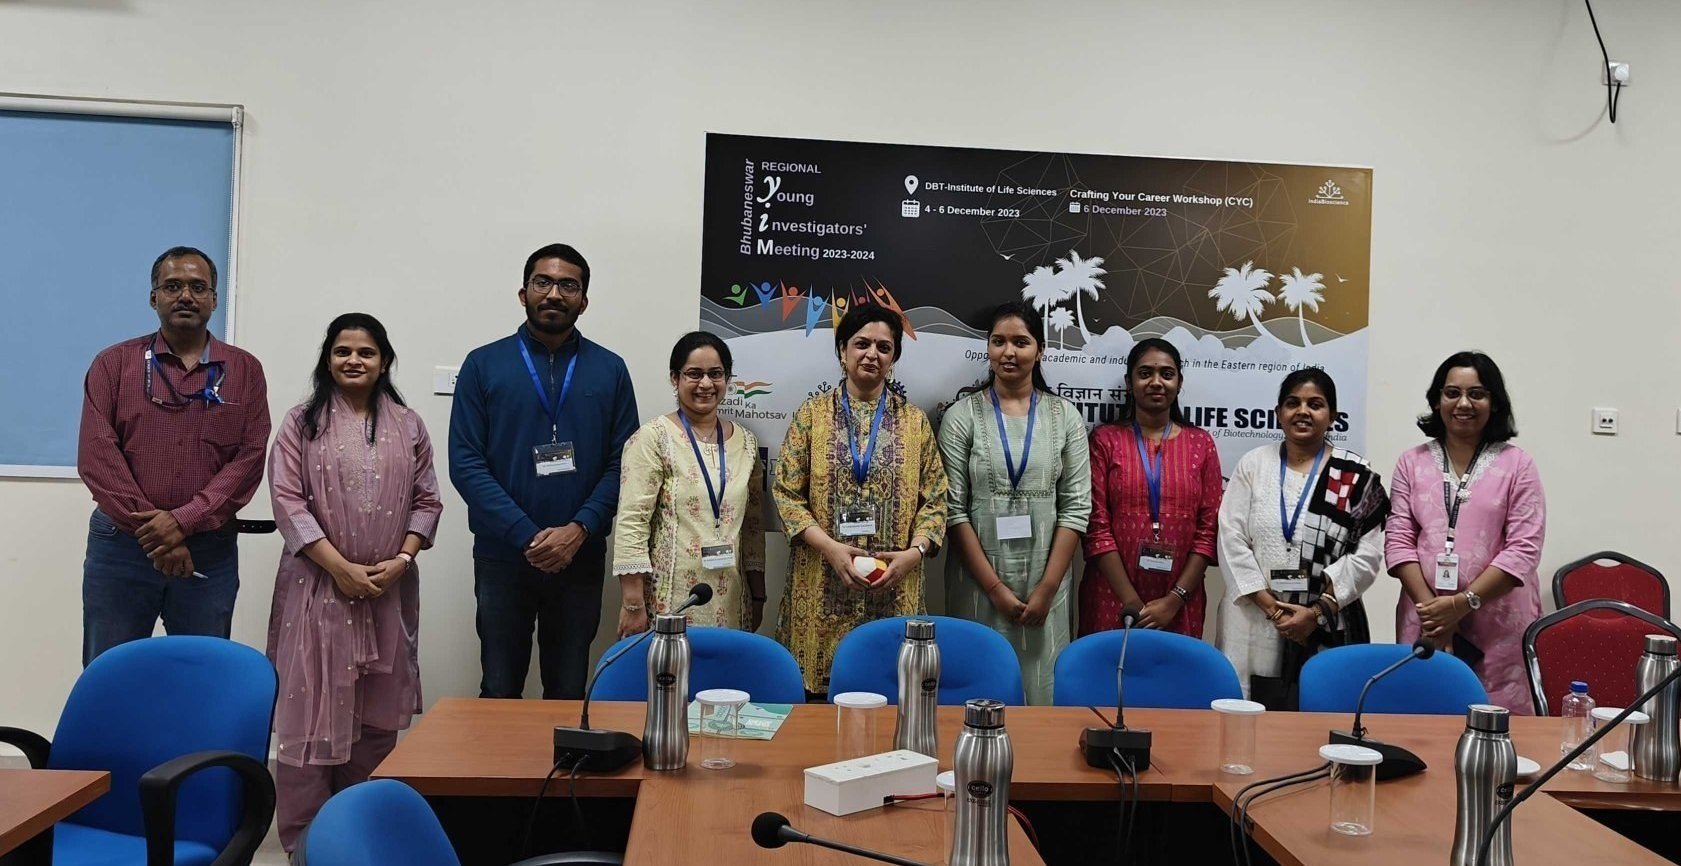 Team IndiaBioscience and co-organisers from DBT-ILS after the Crafting Your Career (CYC) workshop. Credits: RYIM Bhubaneswar organising team.